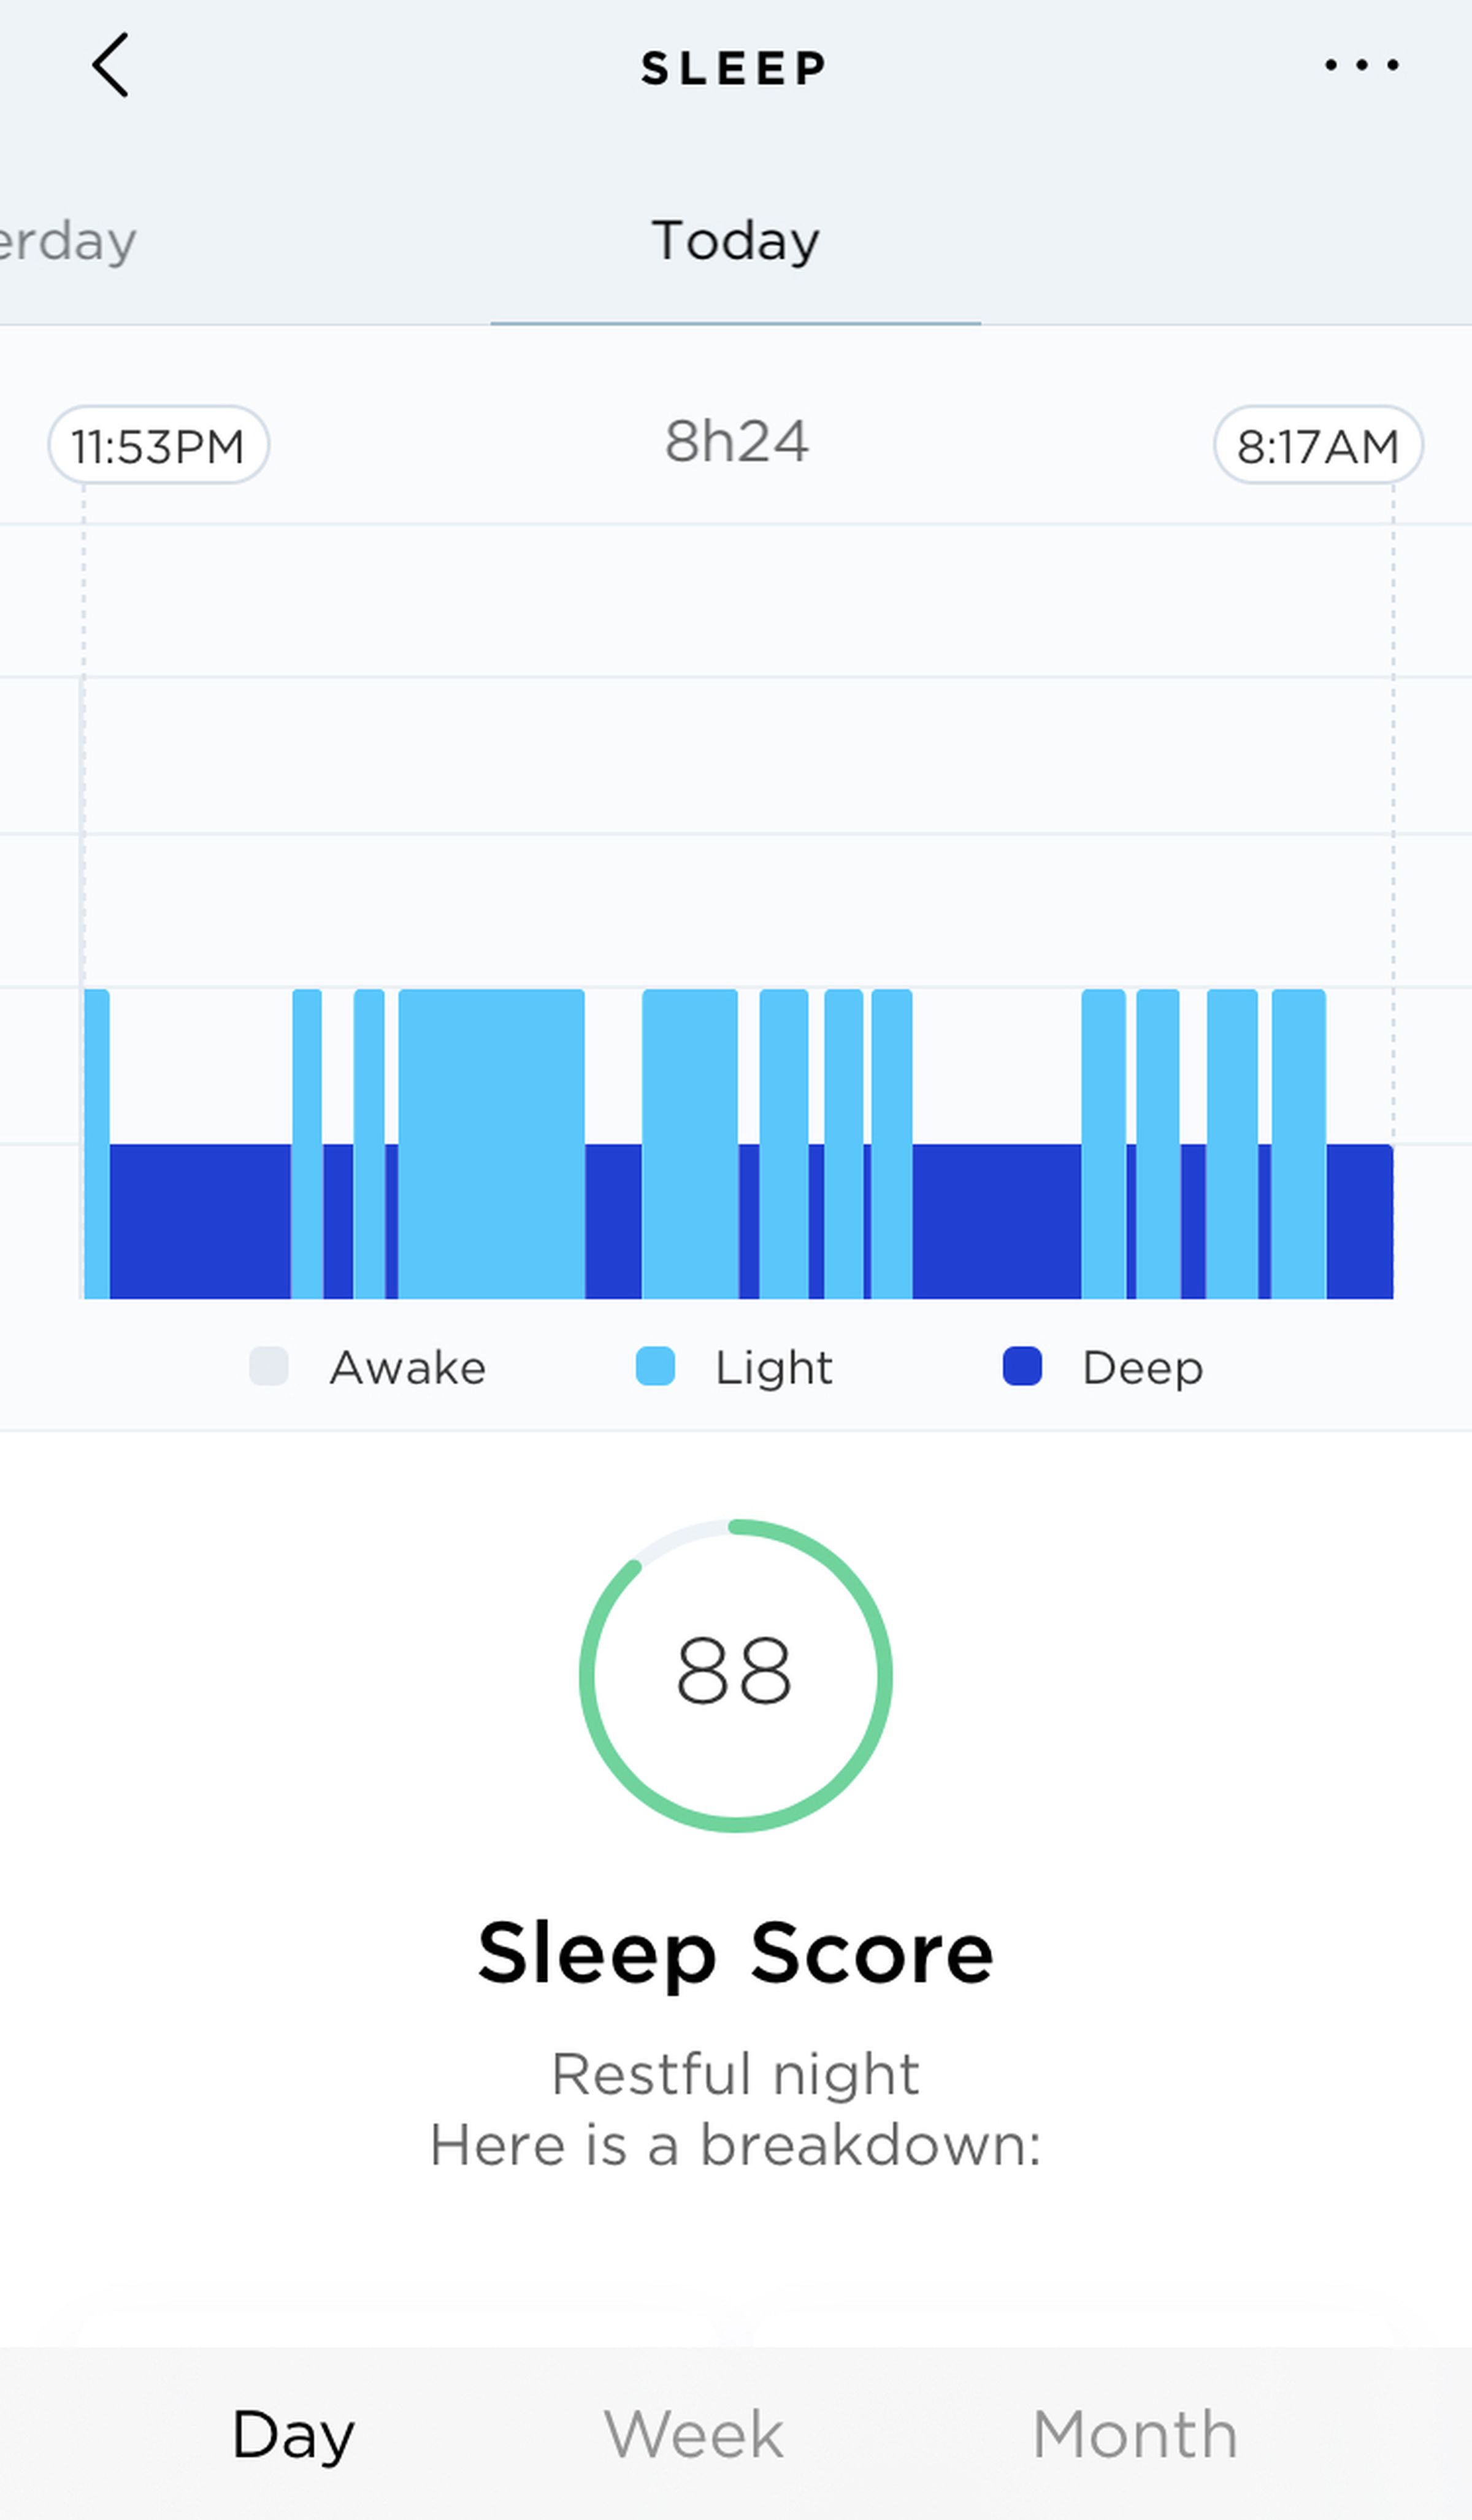 Experts told me the breakdown between light and deep sleep may not be reliable.